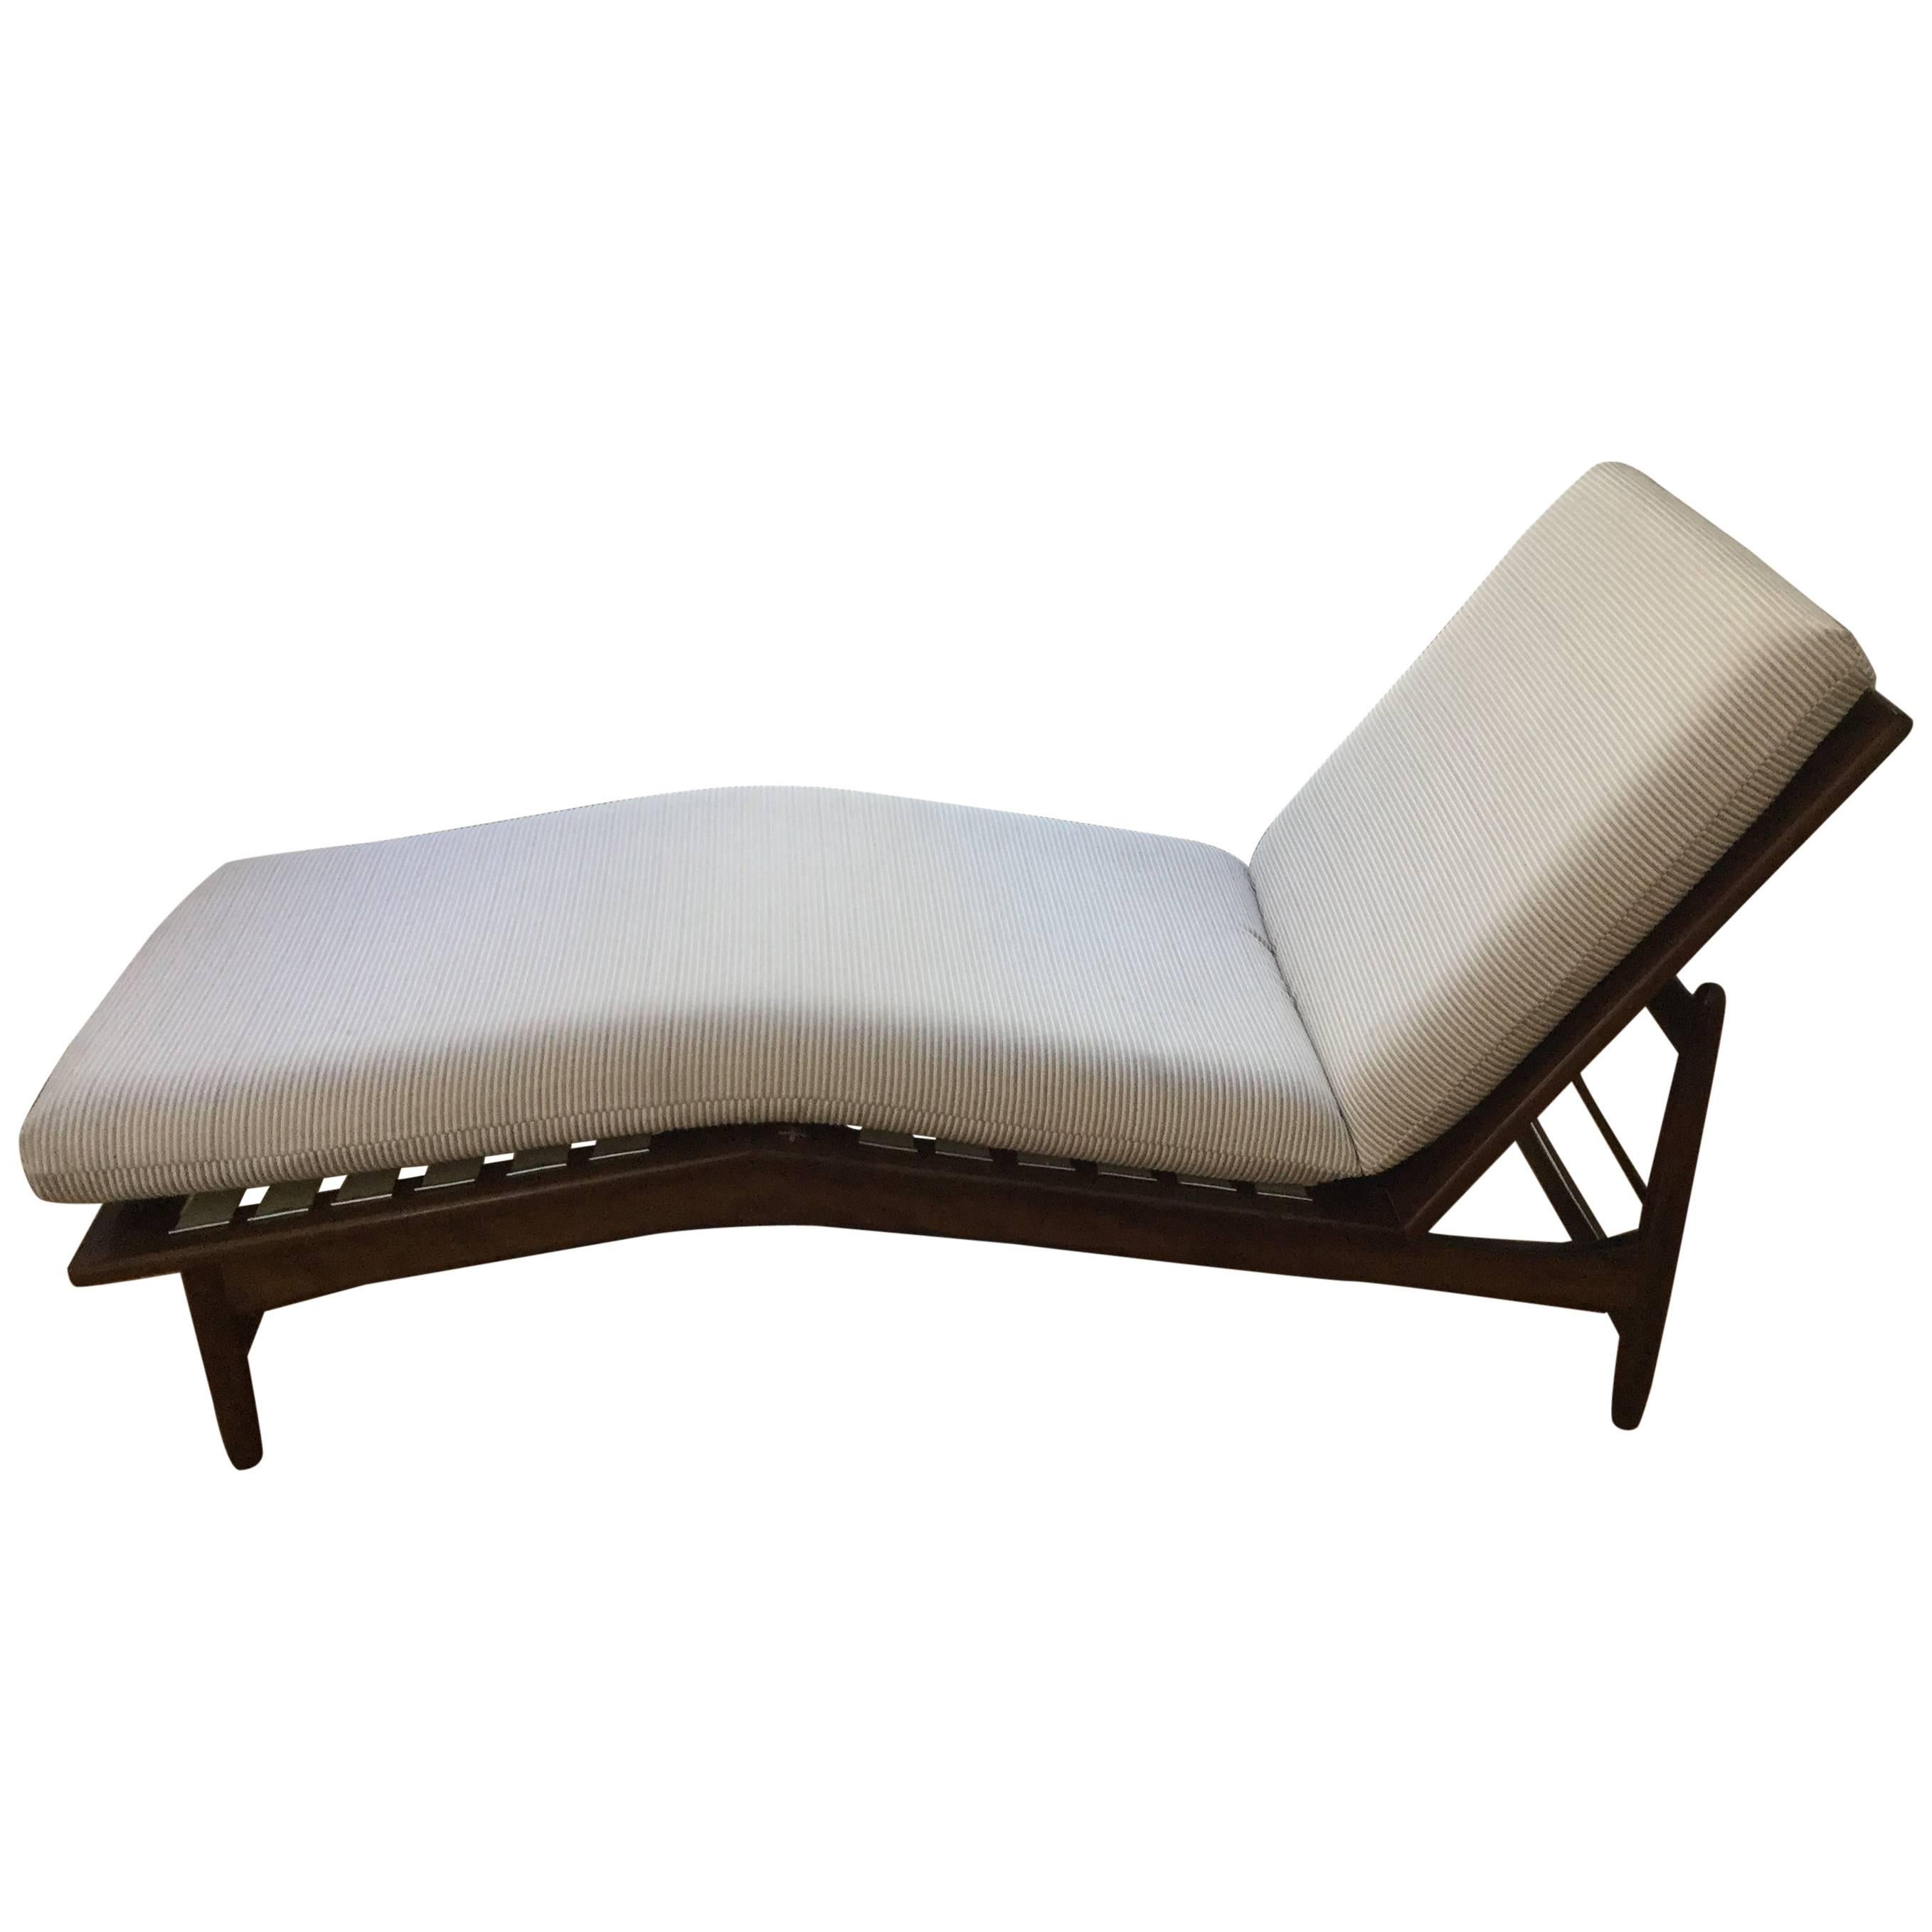 Danish Adjustable Chaise Lounge by Kofod Laresen for Selig For Sale